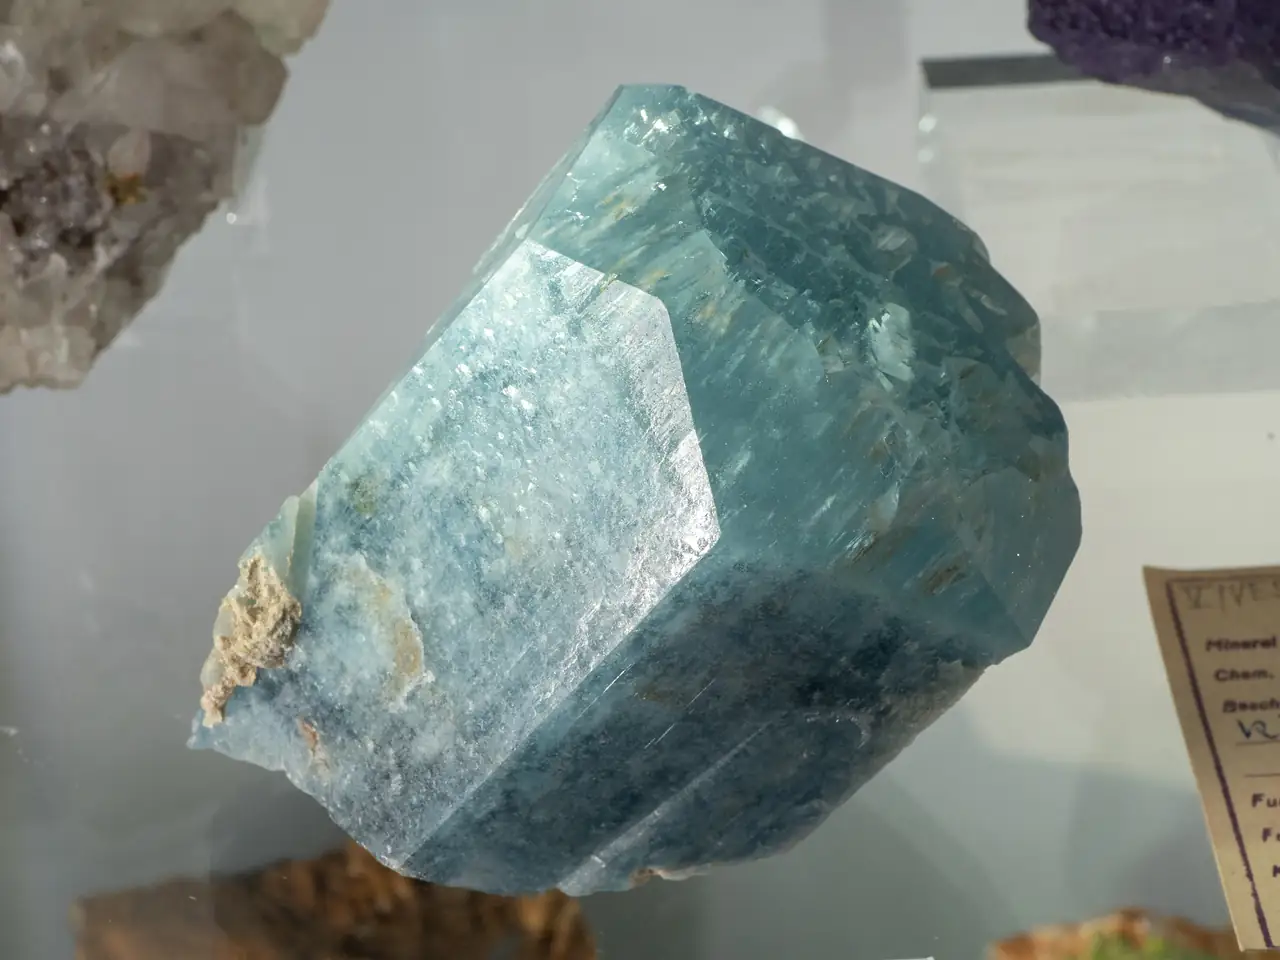 Unusual and richly shaped aquamarine crystal from Alto Lingonha, Mozambique.